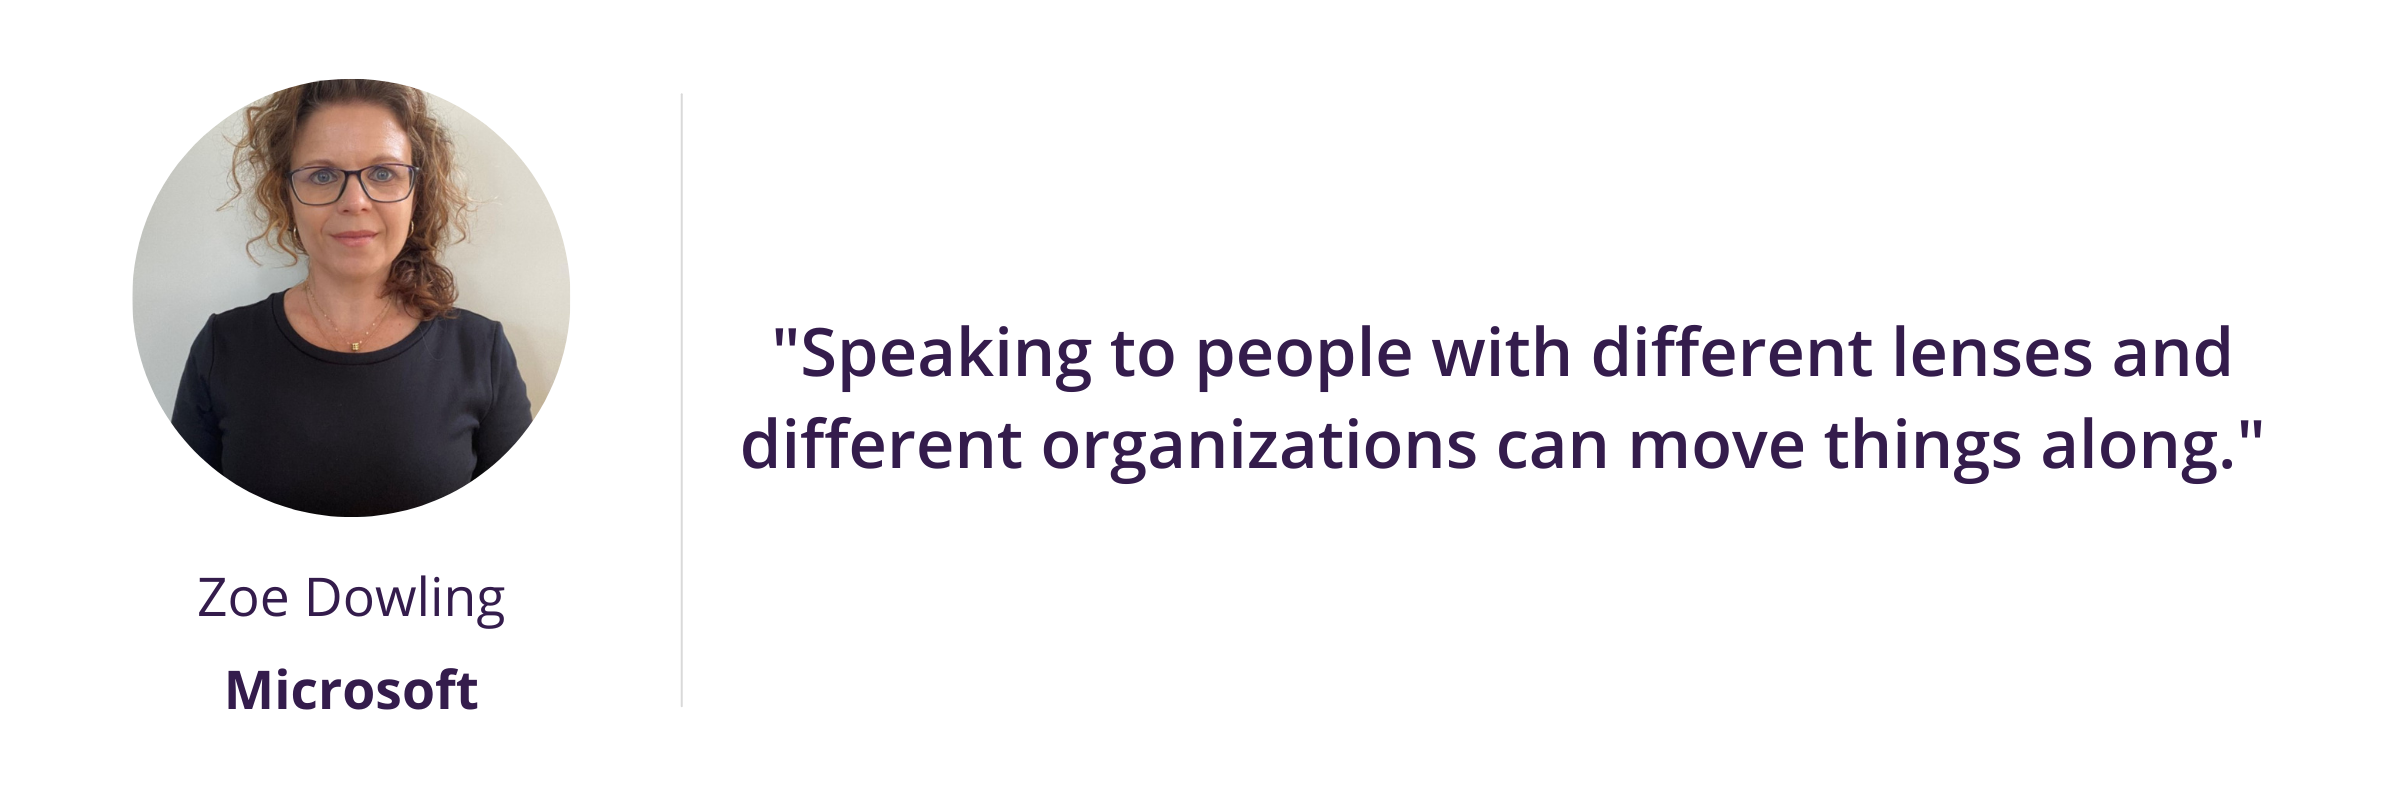 "Speaking to people with different lenses and different organizations can move things along."